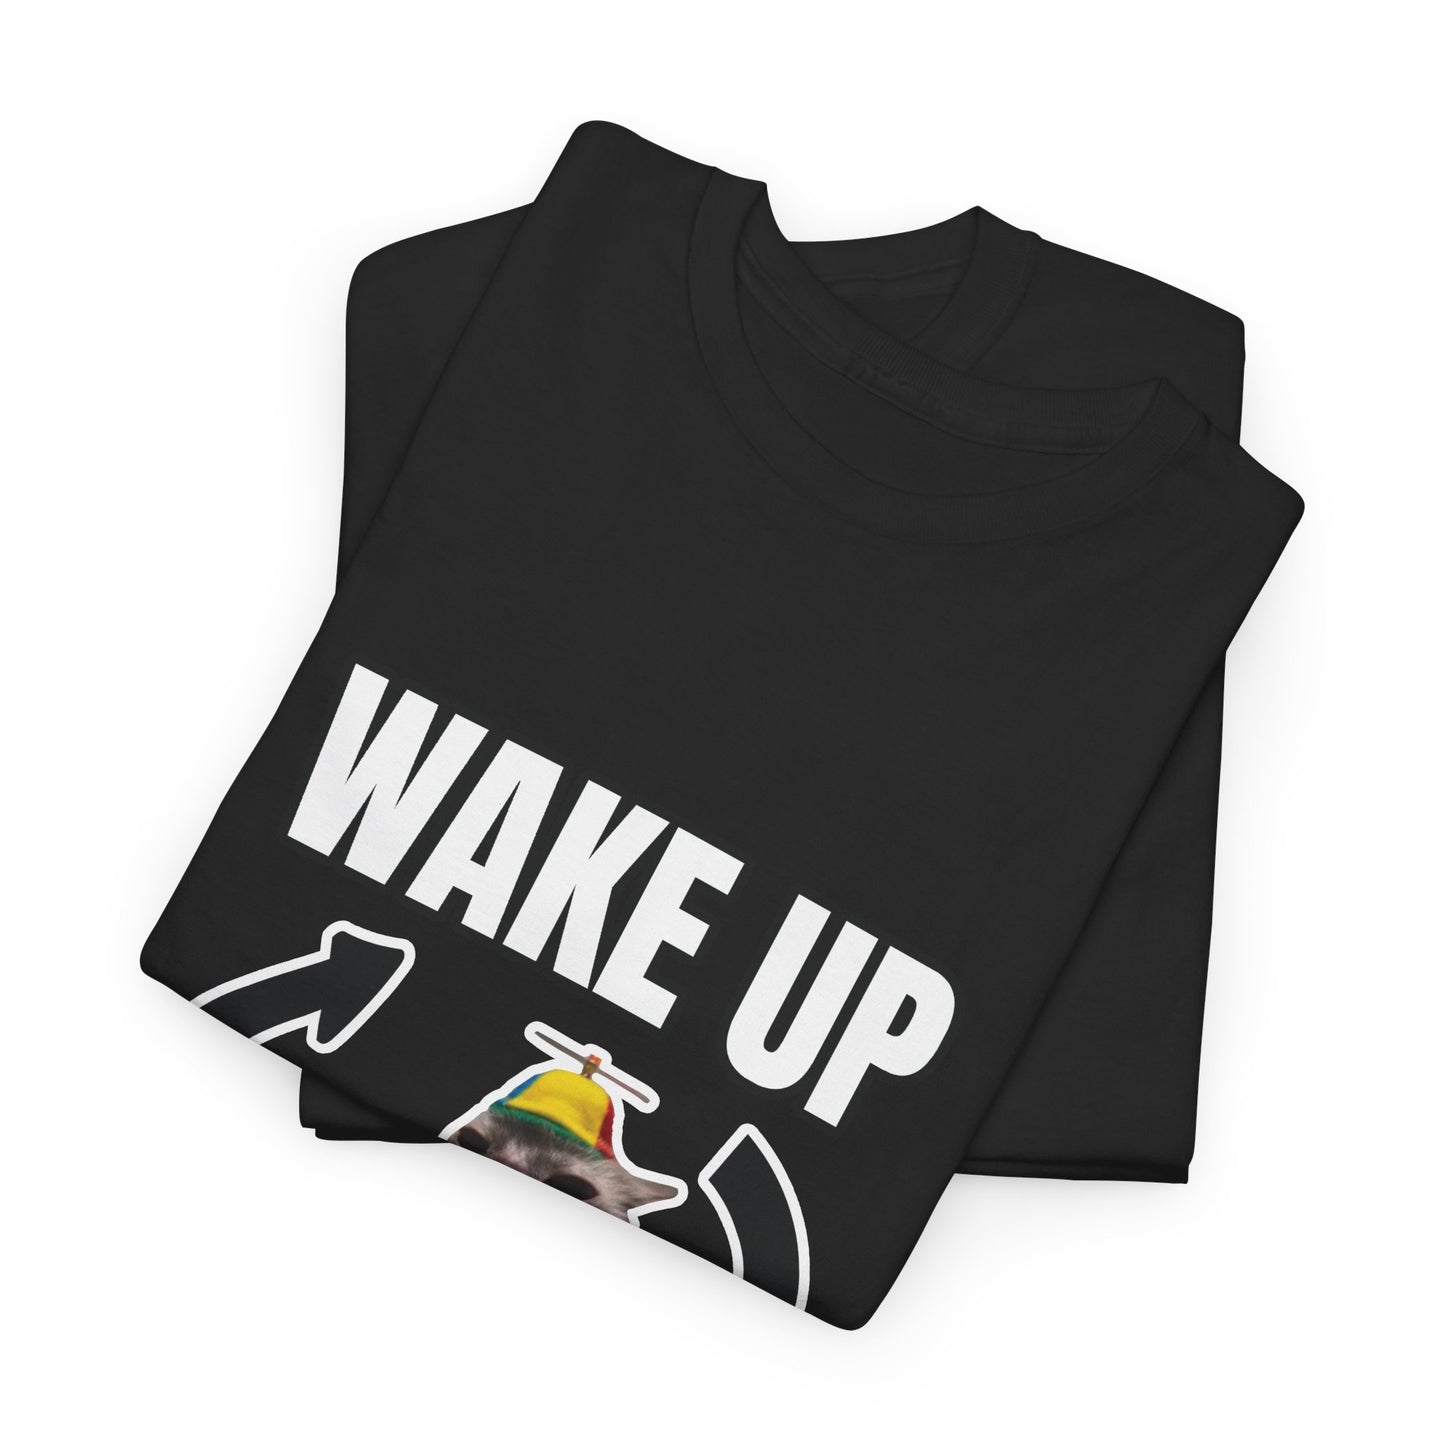 WAKE UP BE SILLY SHIRT